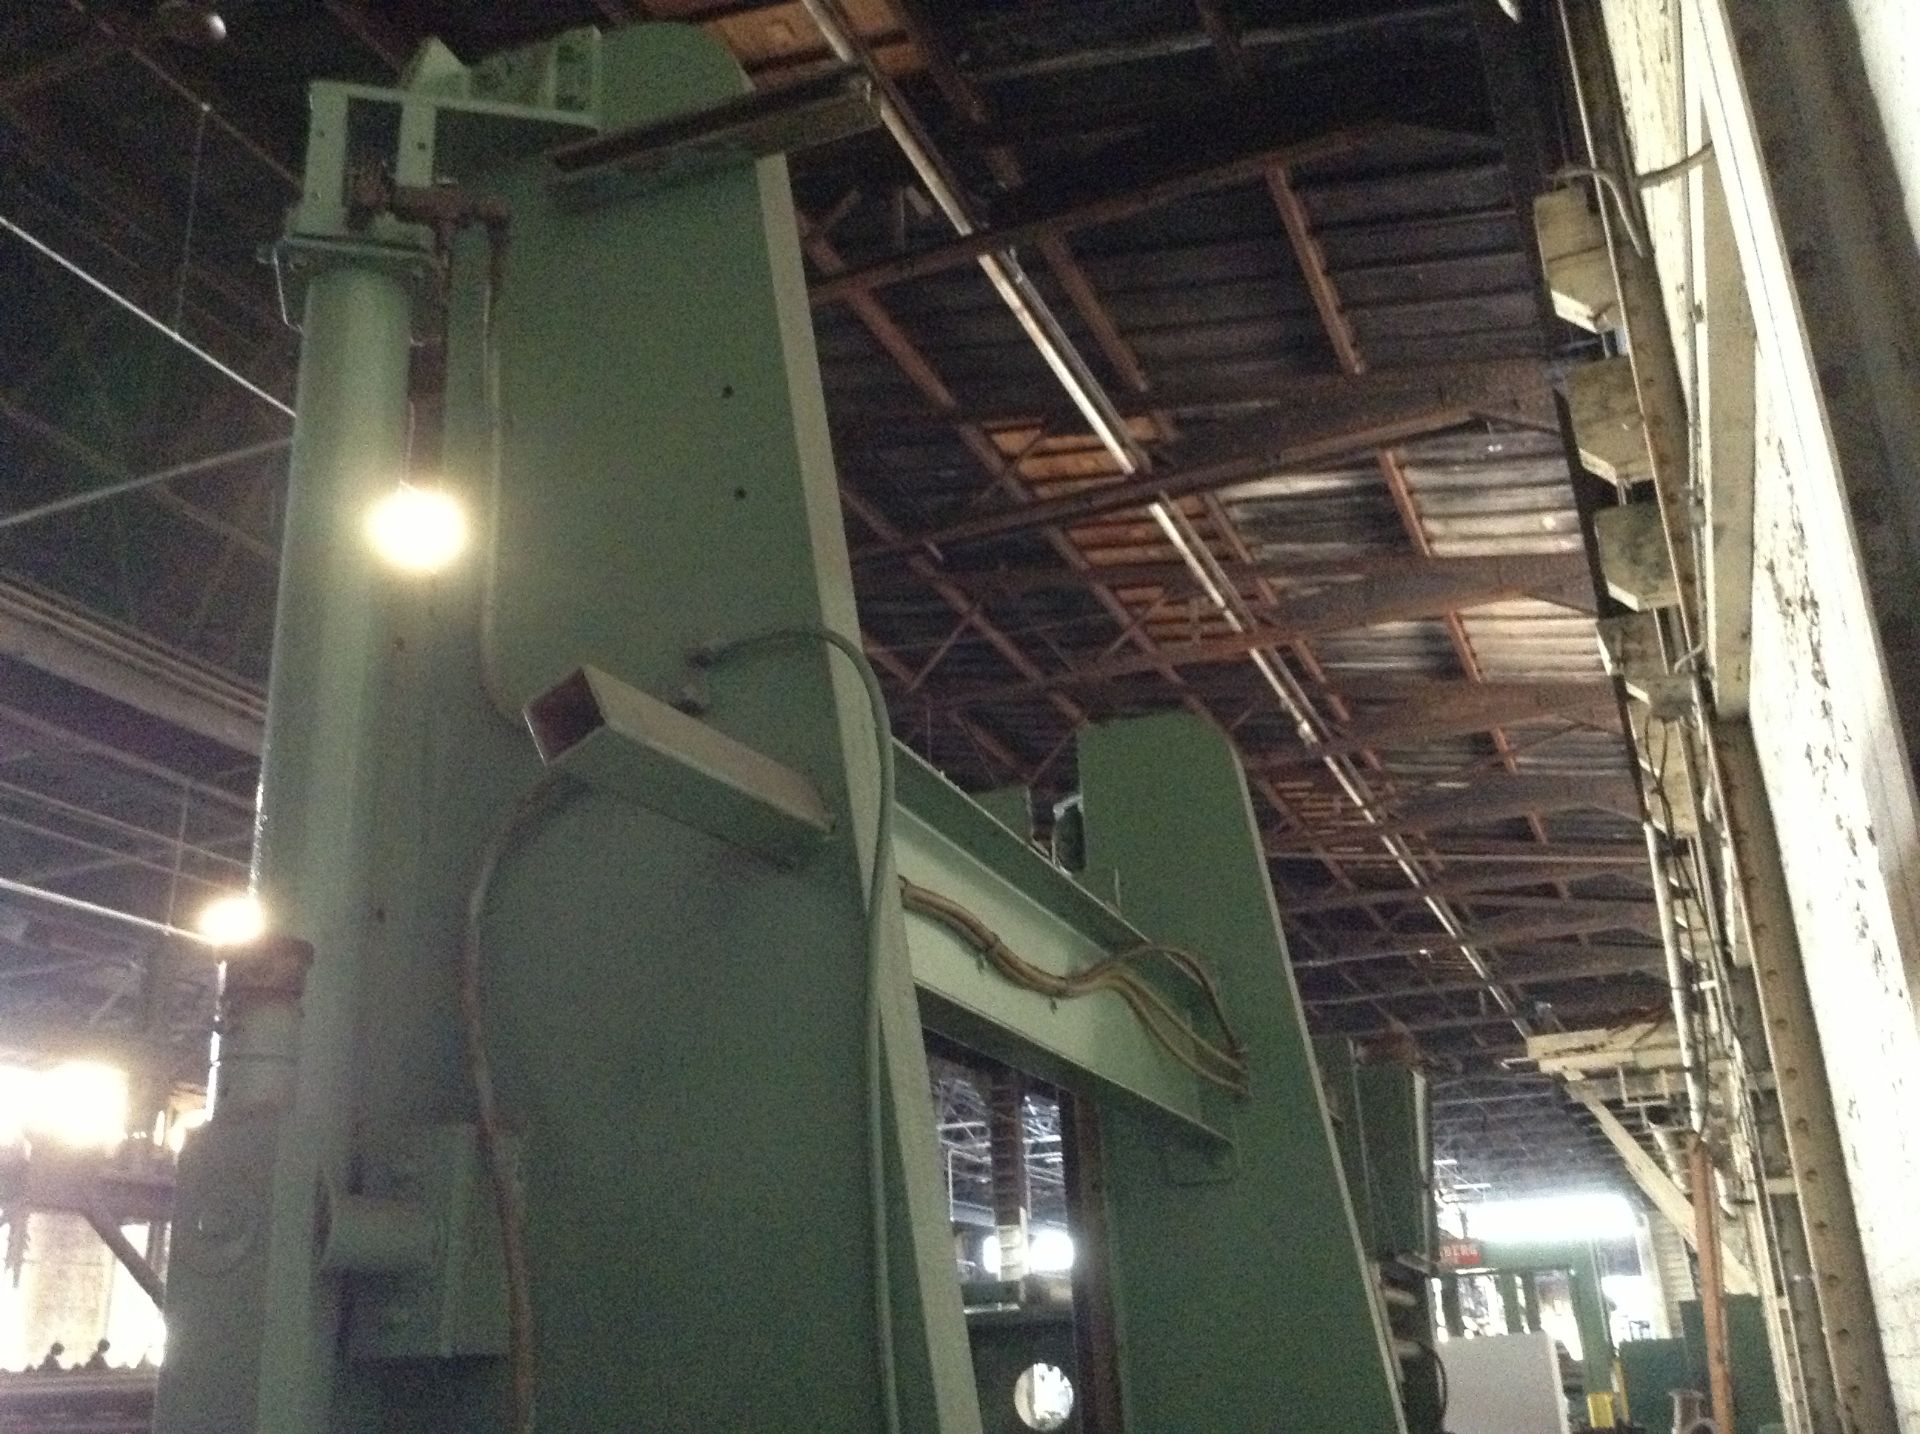 56" Faustel 2-drum surface rewind single shaft rewinder. Was inline with a laminator operating at - Image 9 of 17